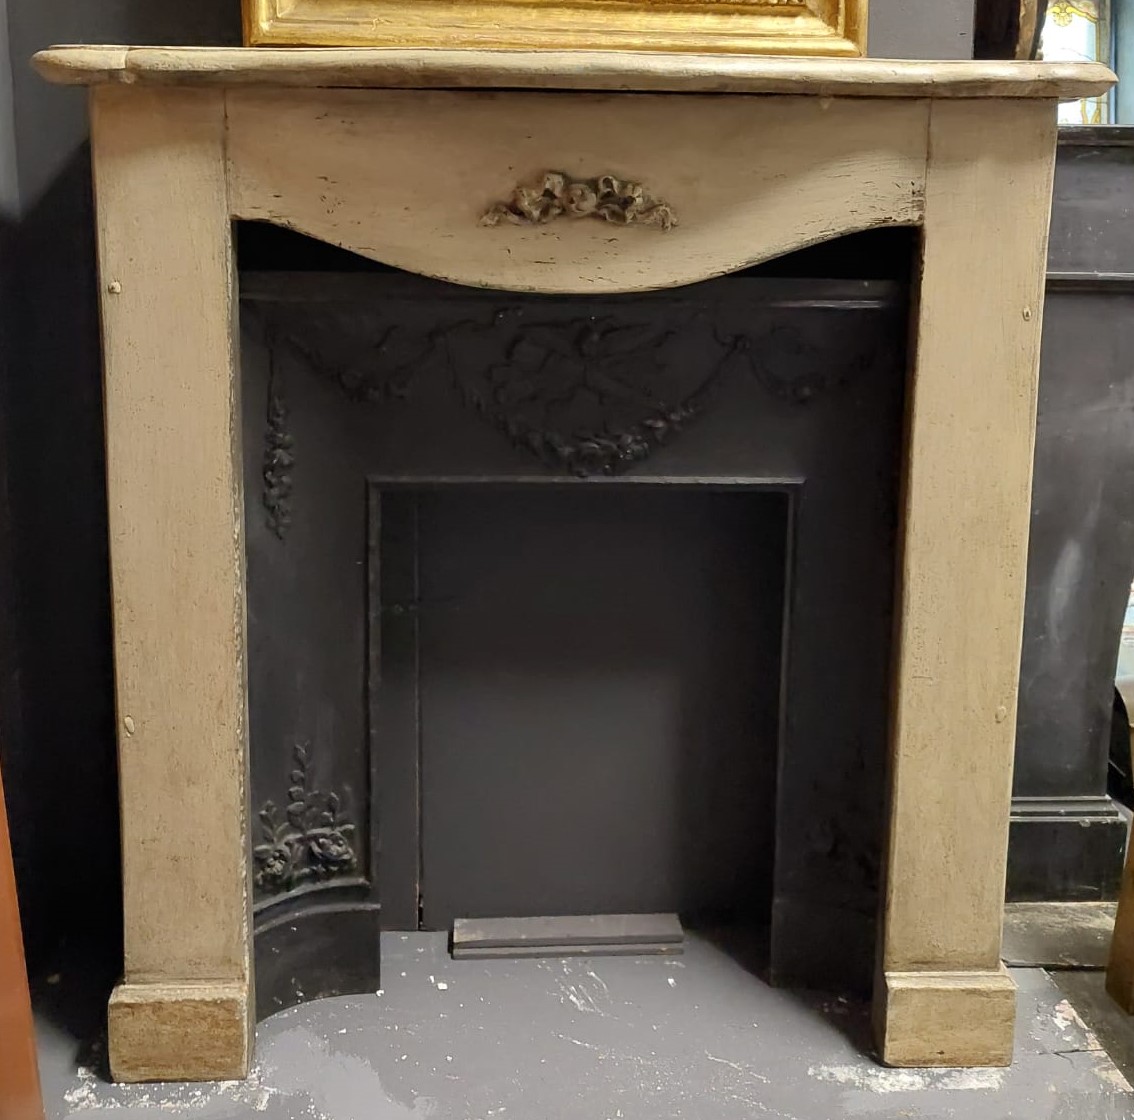 chl157 - lacquered wood fireplace, 19th century, measuring cm W 108 x H 109